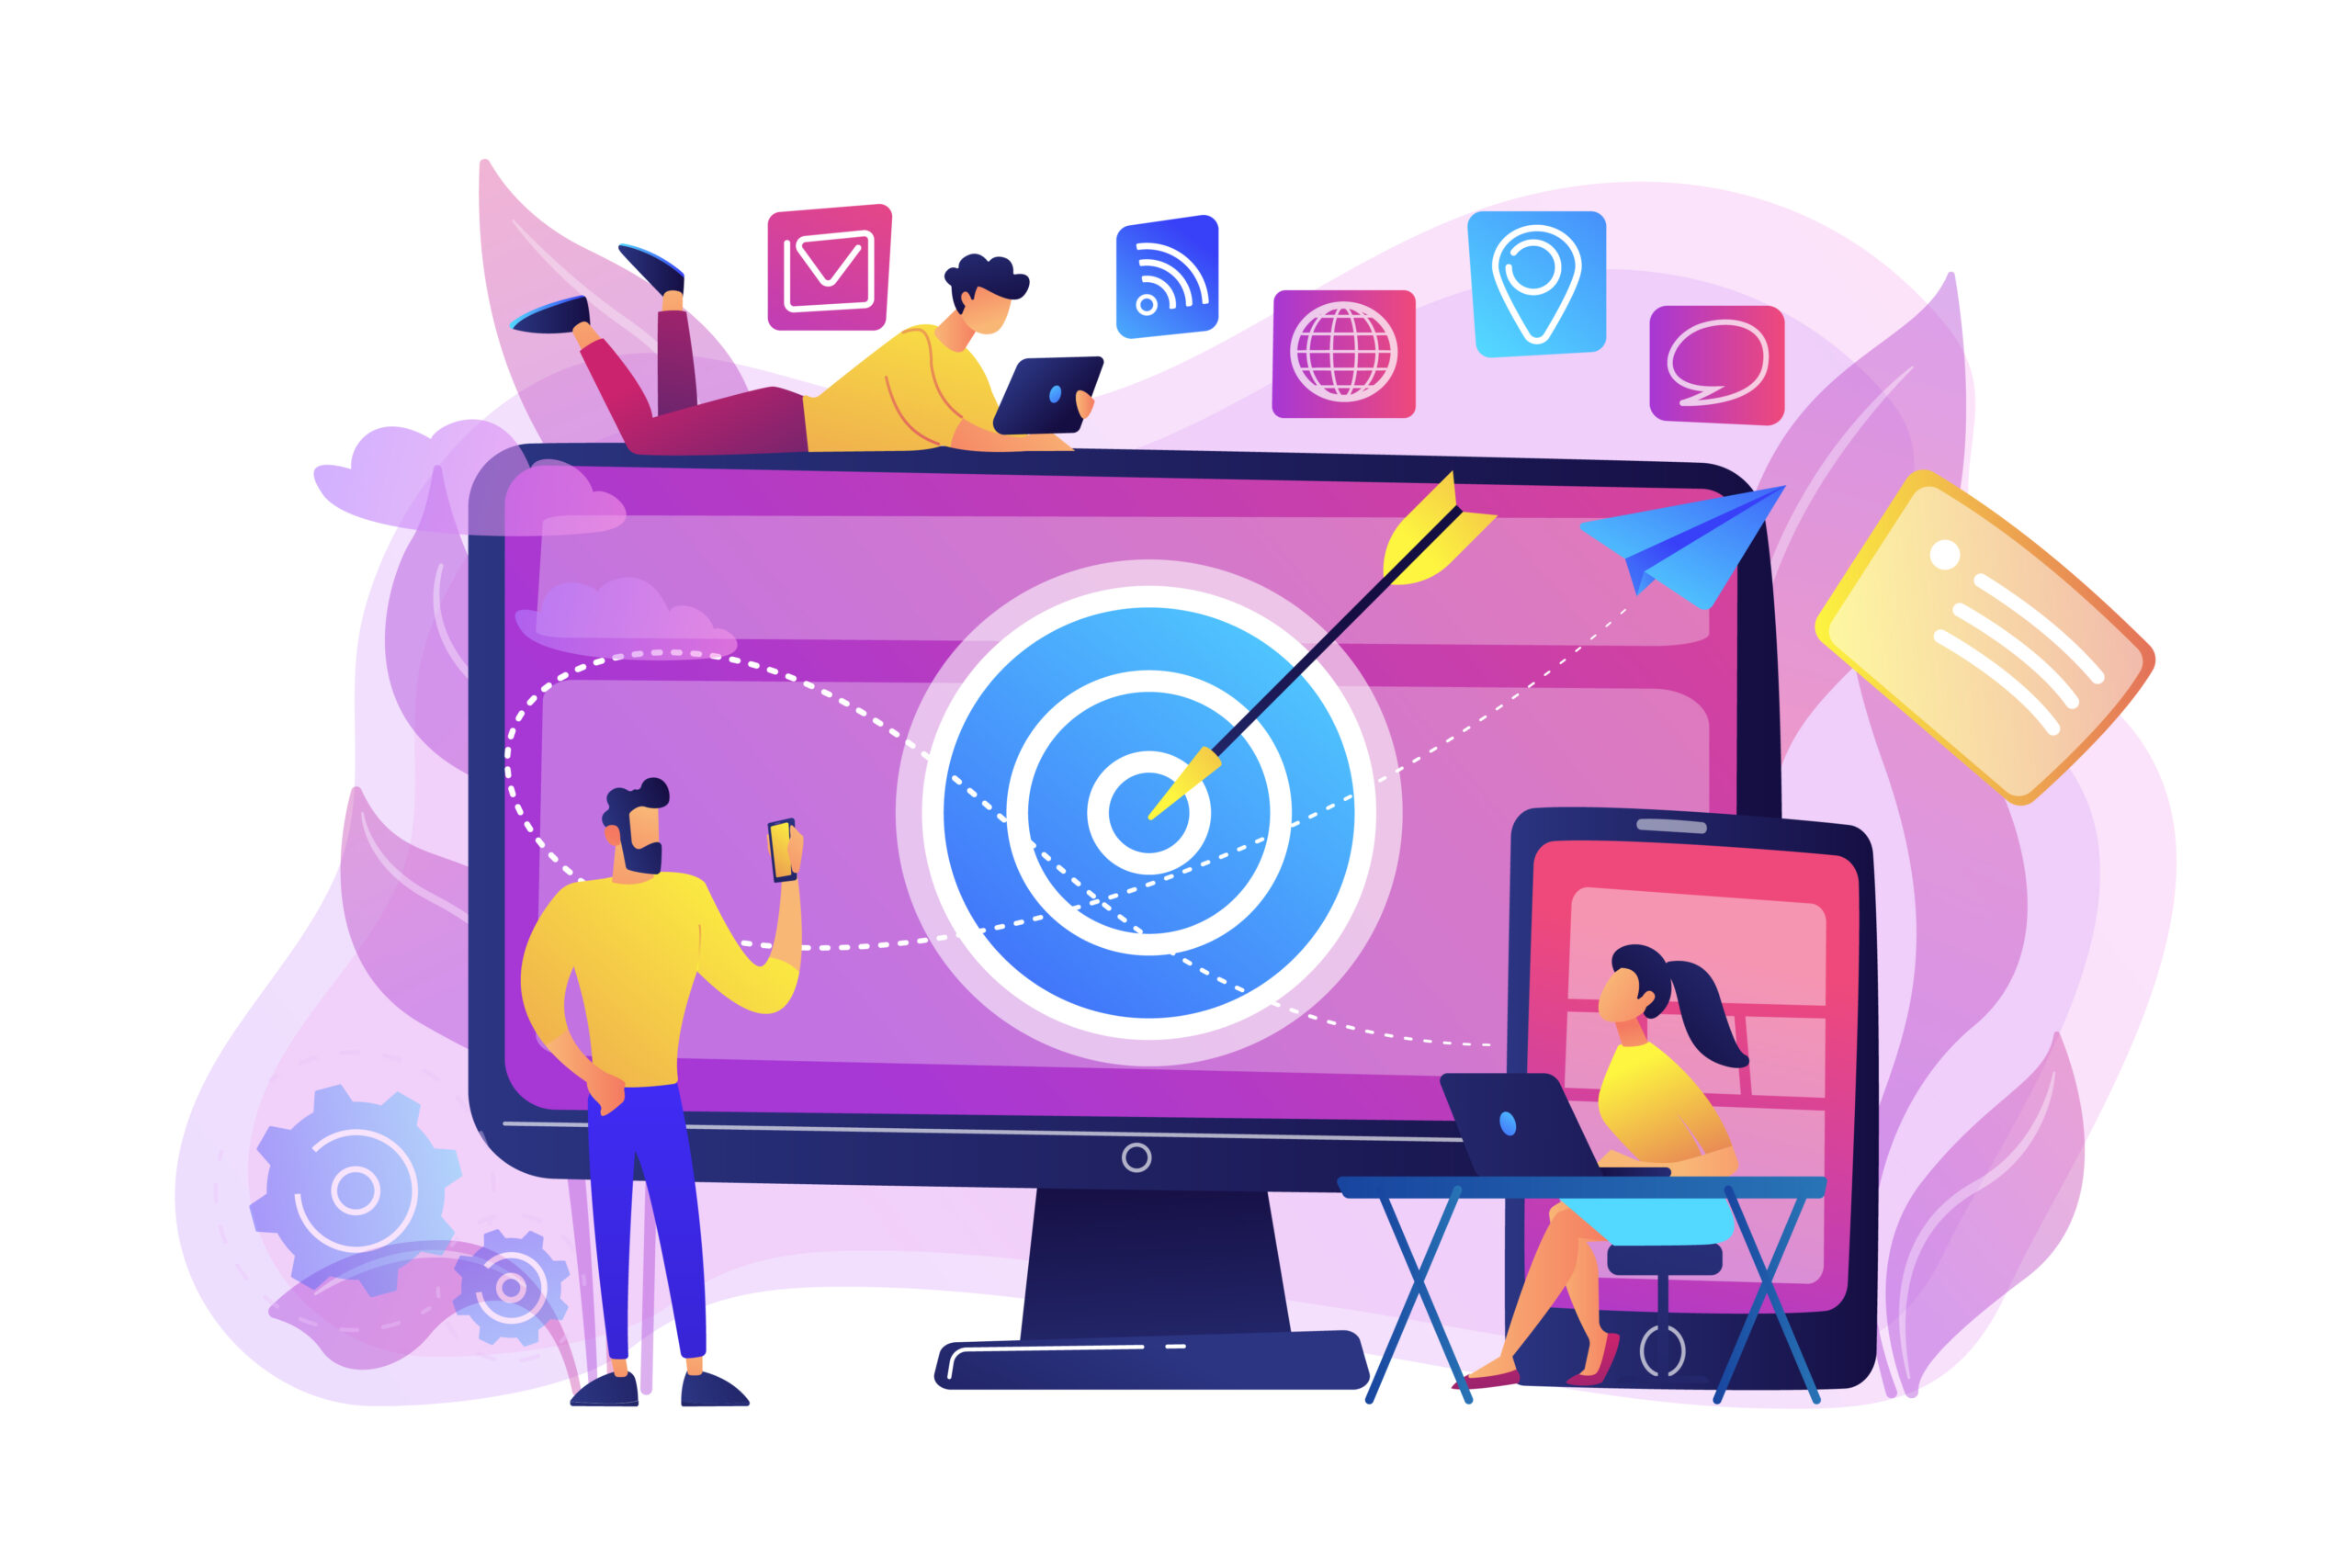 Concumers with devices get targeted ads and messages. Multi device targeting, reaching audience, cross-device marketing concept on white background. Bright vibrant violet vector isolated illustration